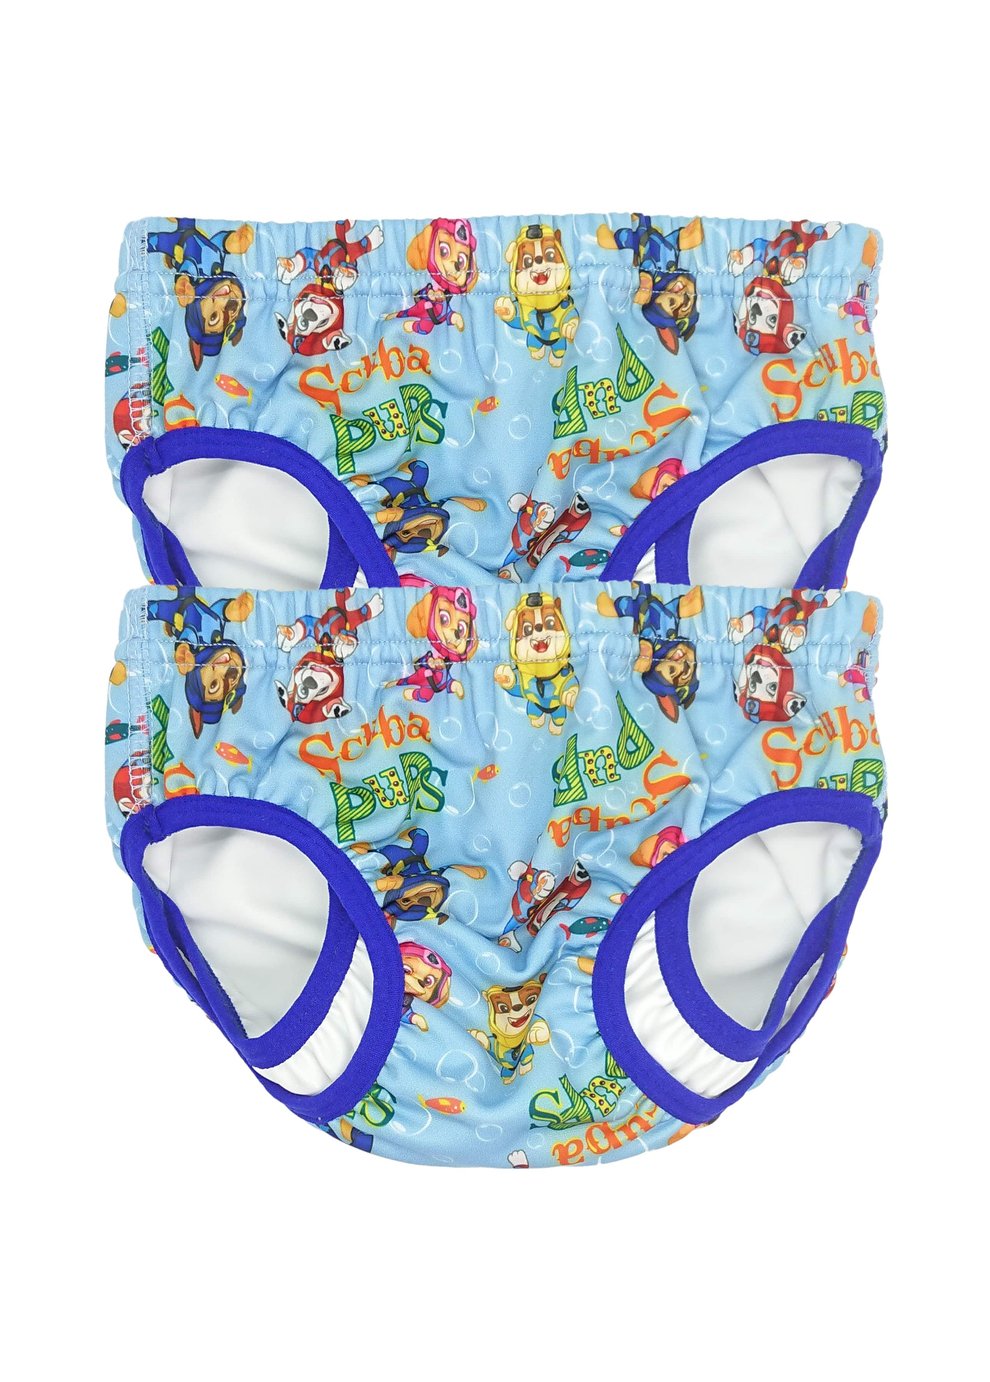 PAW Patrol Small Pack of 2 Swim Pants Review